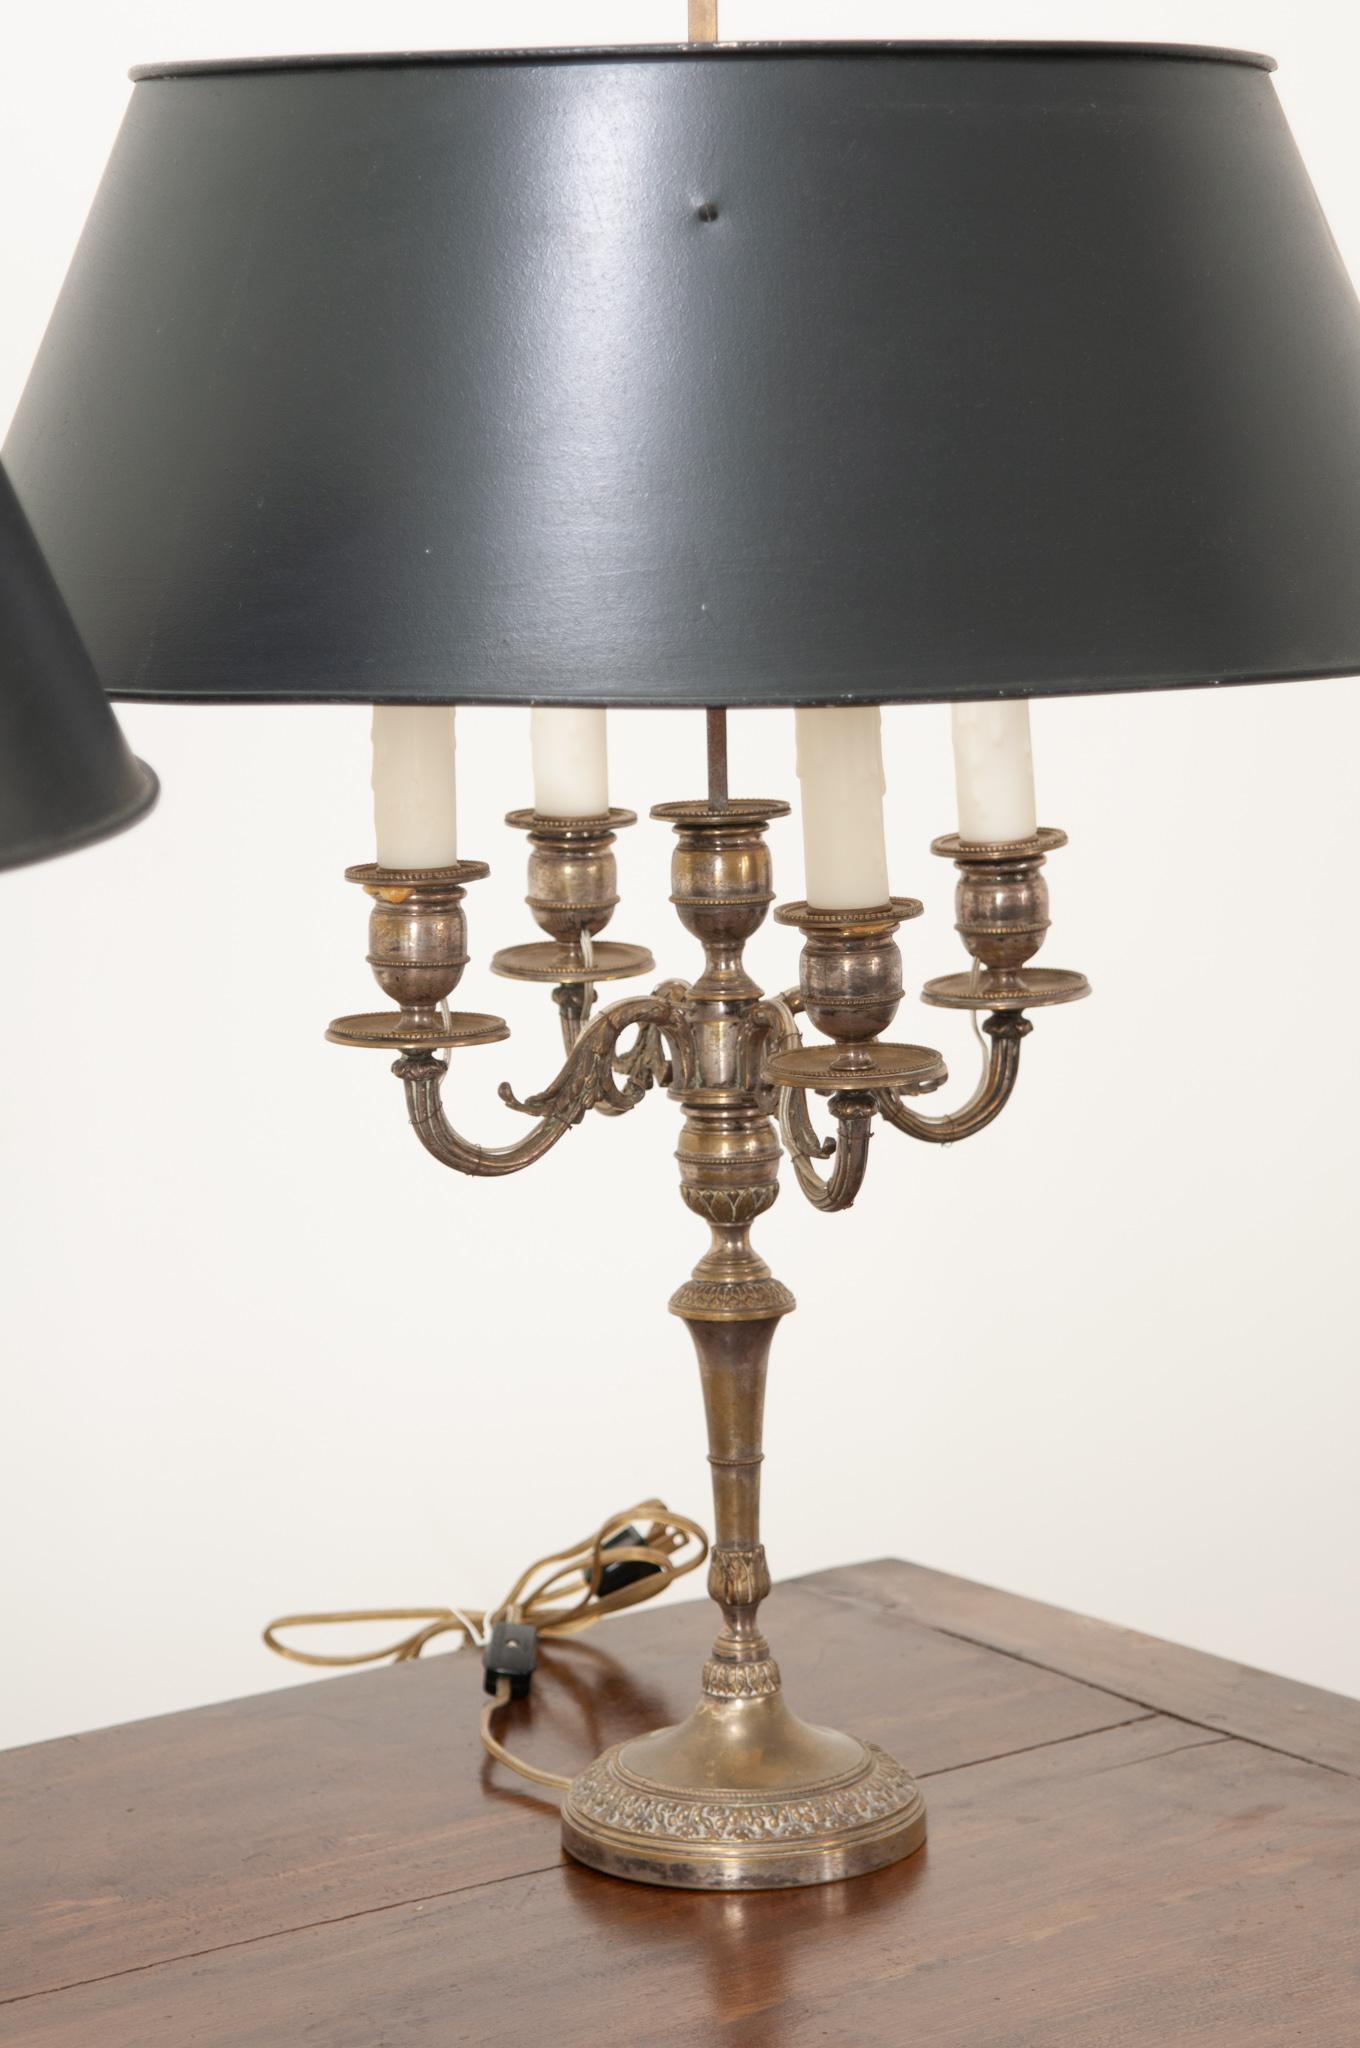 Pair of Candelabra Lamps in the Bouillotte Style In Good Condition For Sale In Baton Rouge, LA